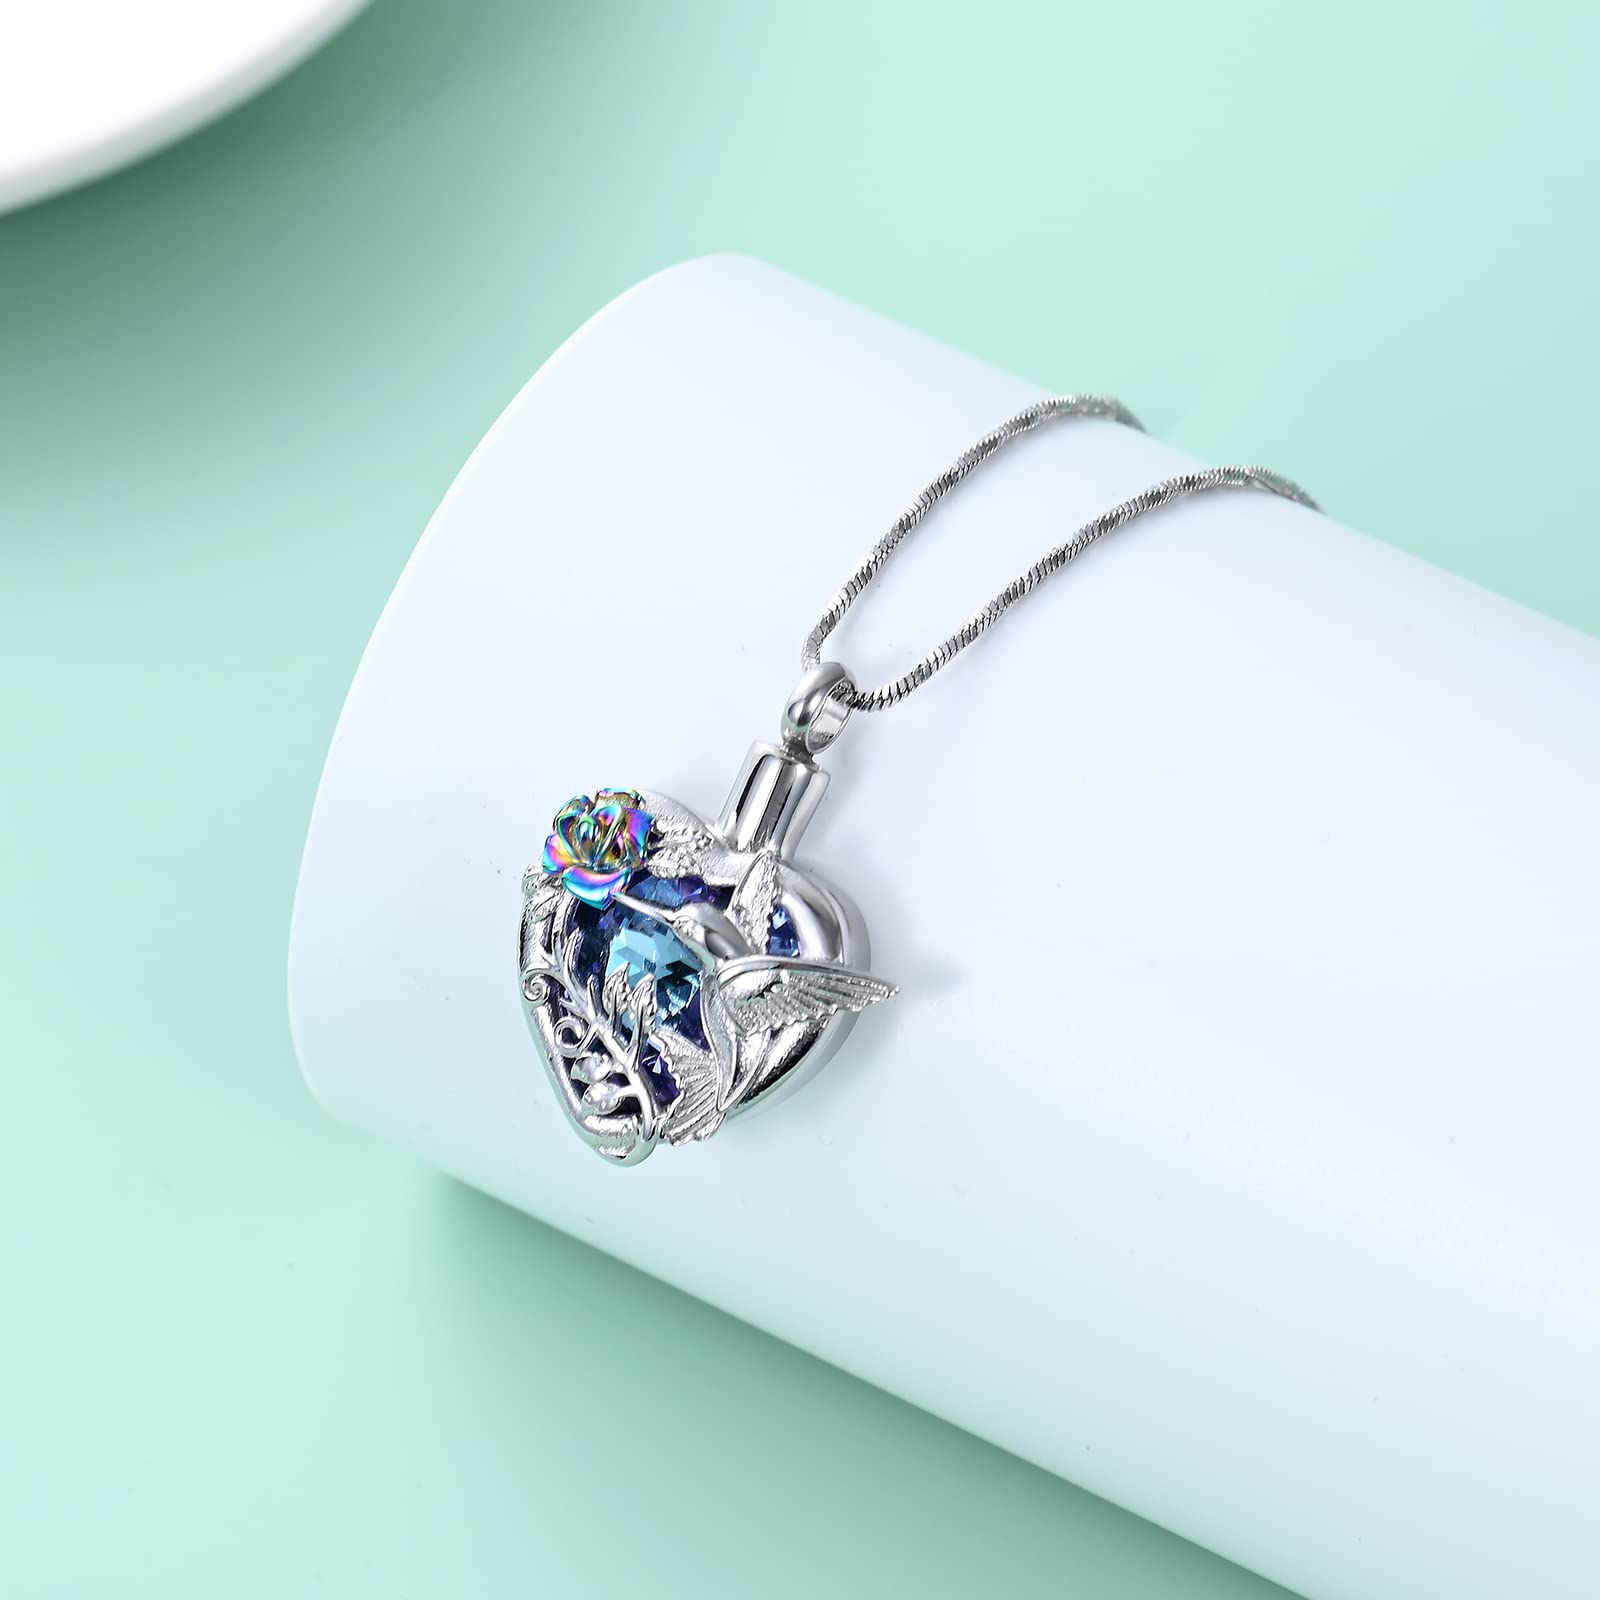 memorial jewelry Birthstone Personalized Hummingbird and Heart Cremation Urn Necklace Pendant Ashes Jewelry